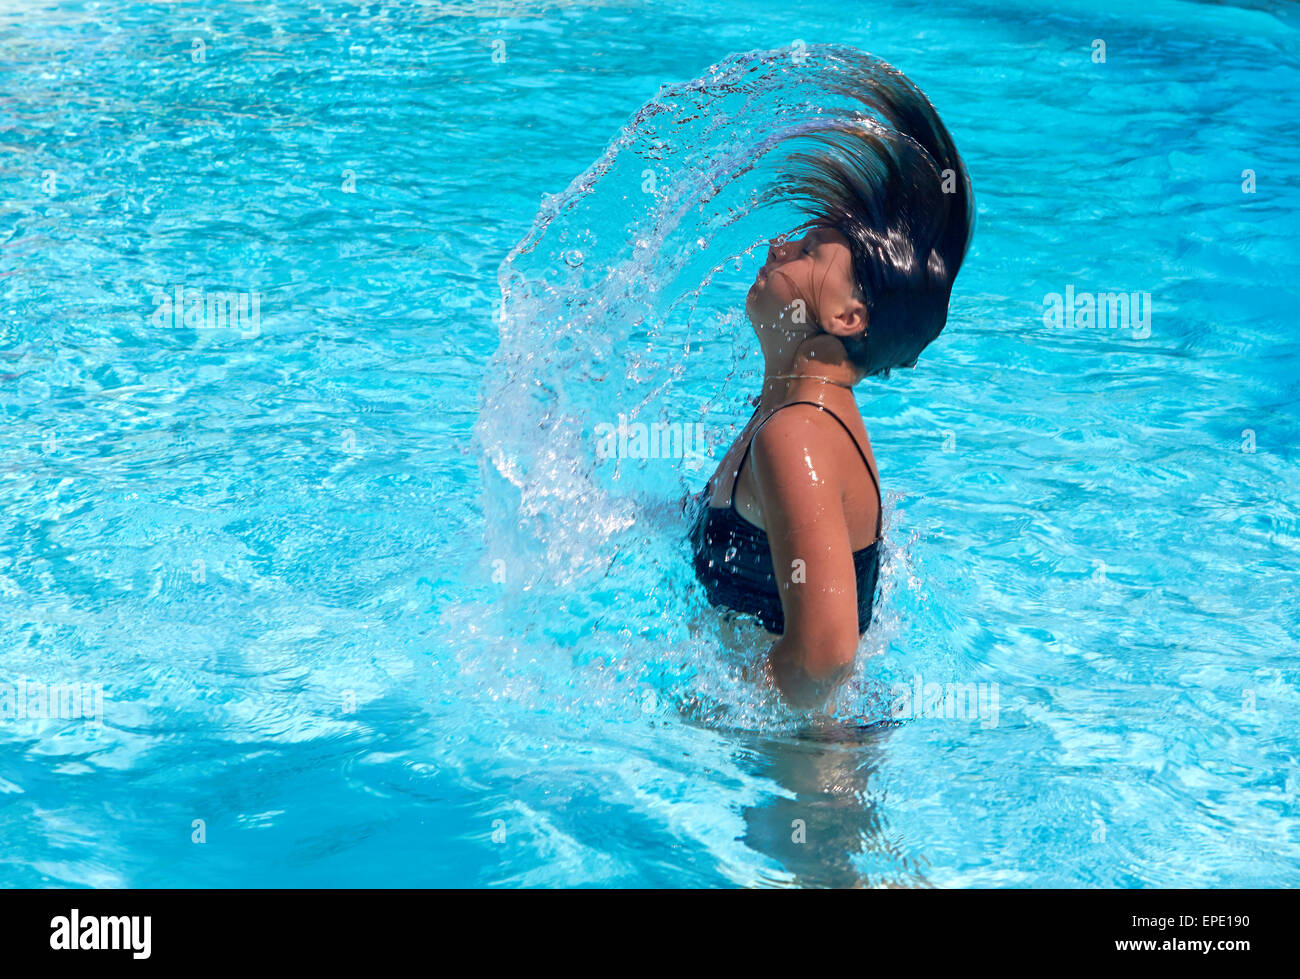 Pretty teen girl whipping her hair back in the pool and spraying water everywhere Stock Photo